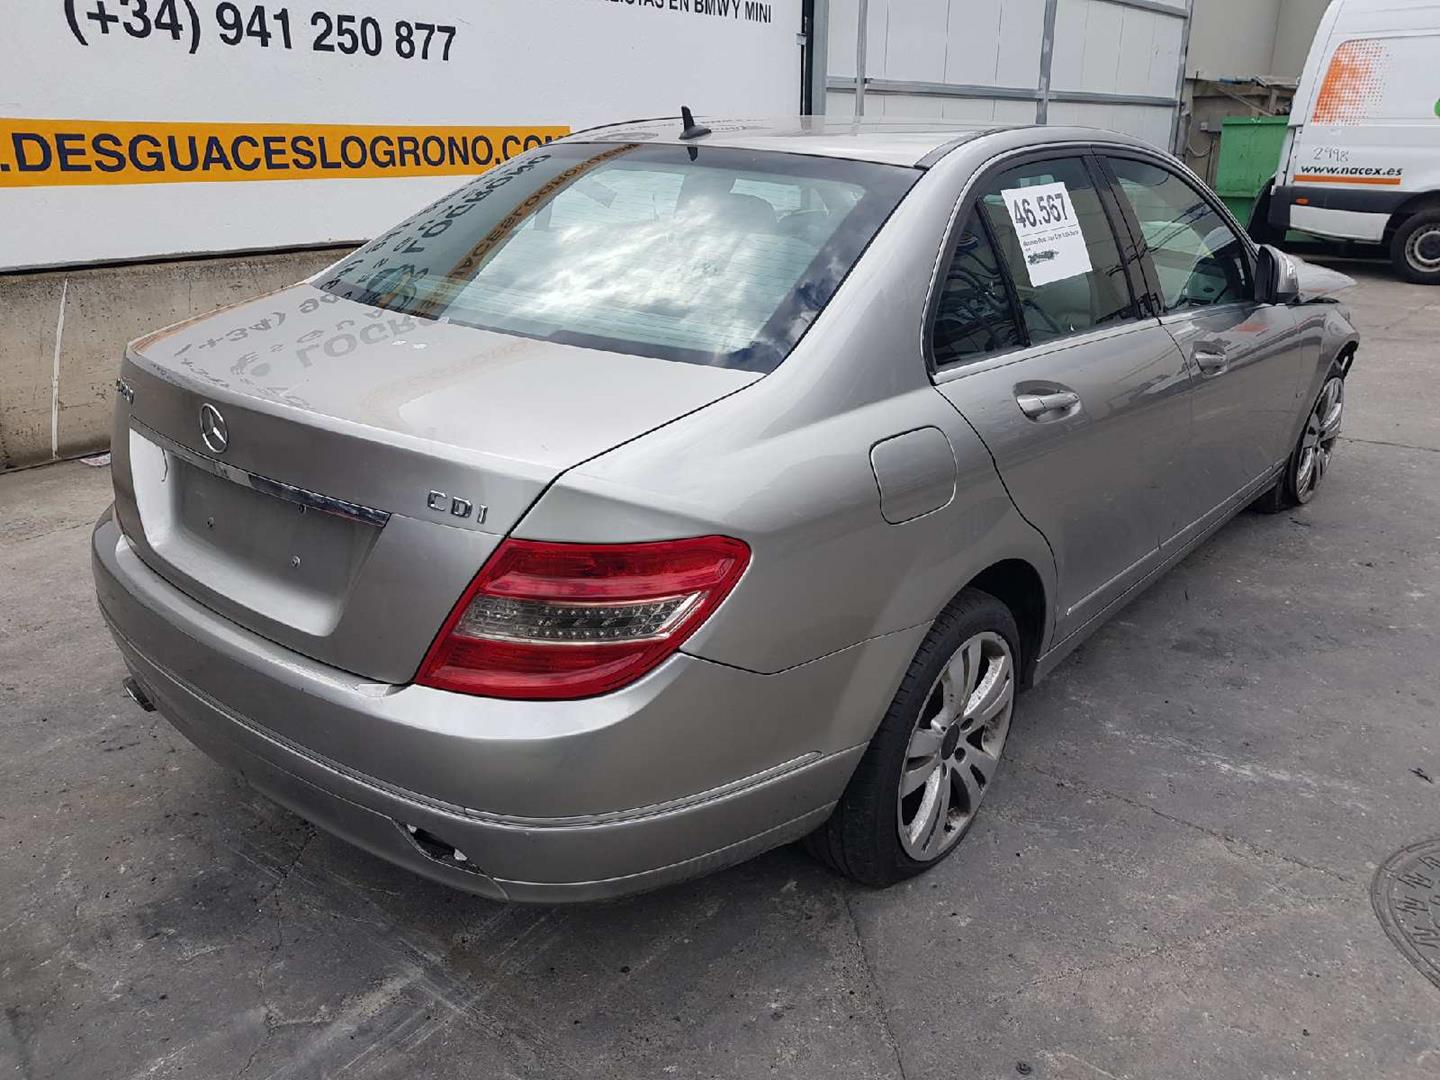 MERCEDES-BENZ C-Class W204/S204/C204 (2004-2015) Other Control Units A2048207685, 2048207685, TRASERODER 19787656